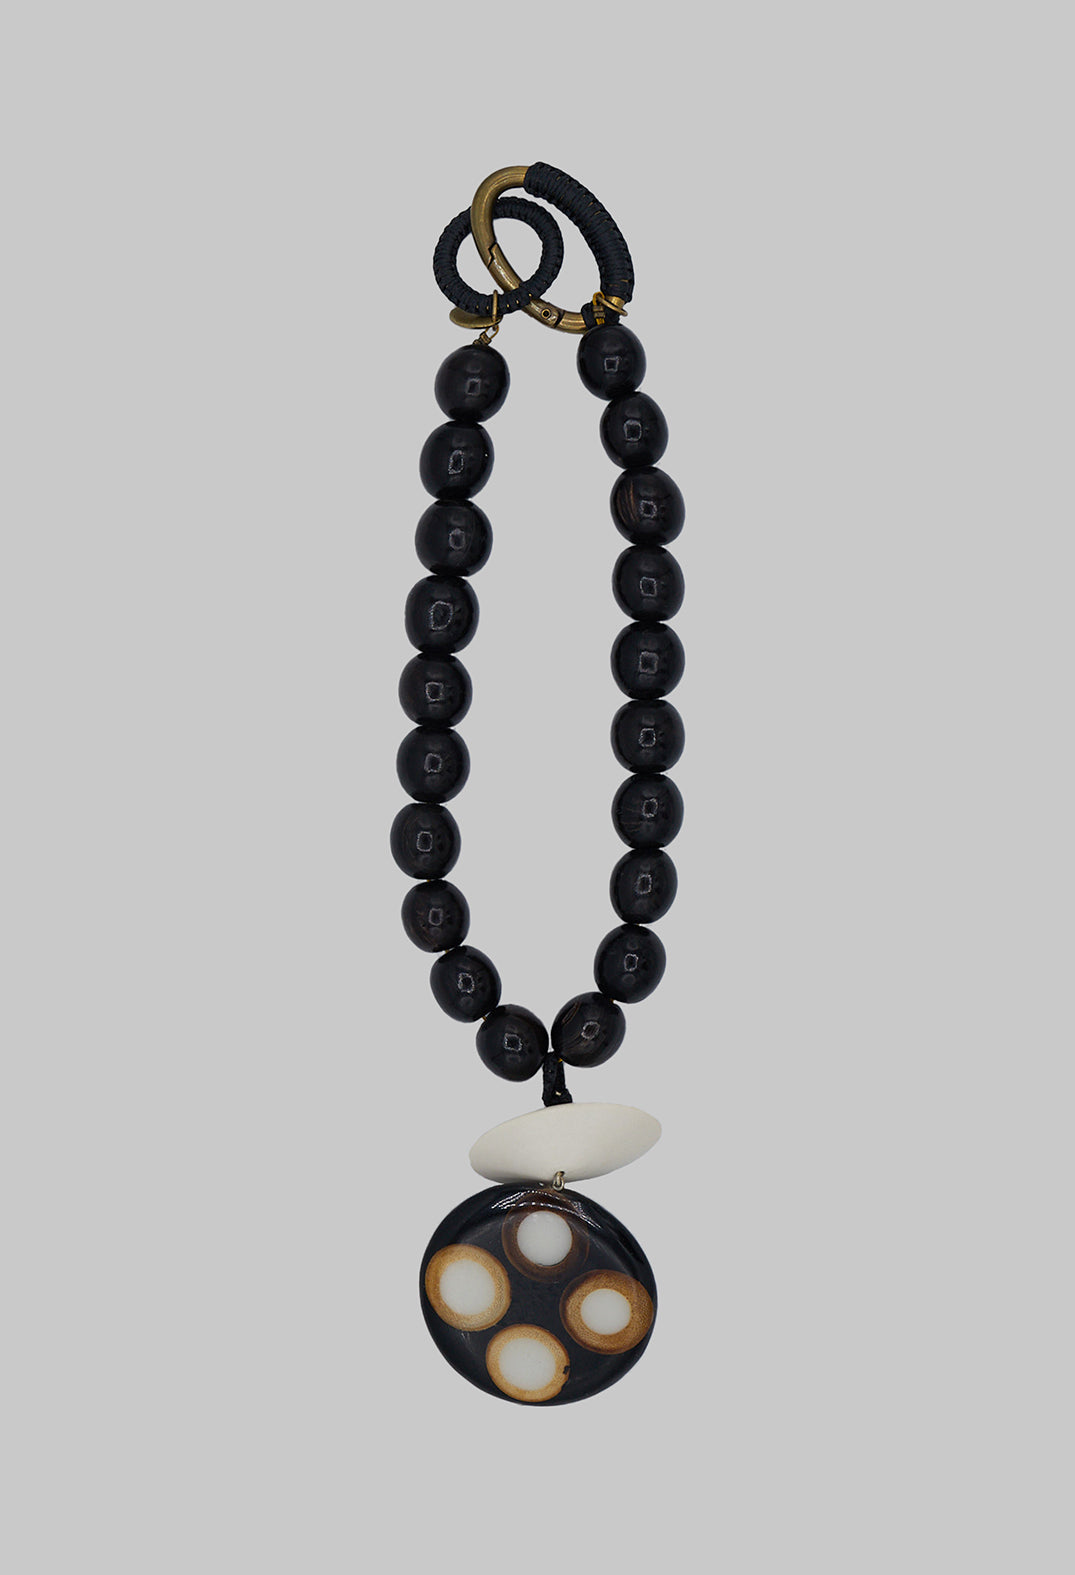 Wooden Elements Horn Necklace in Black